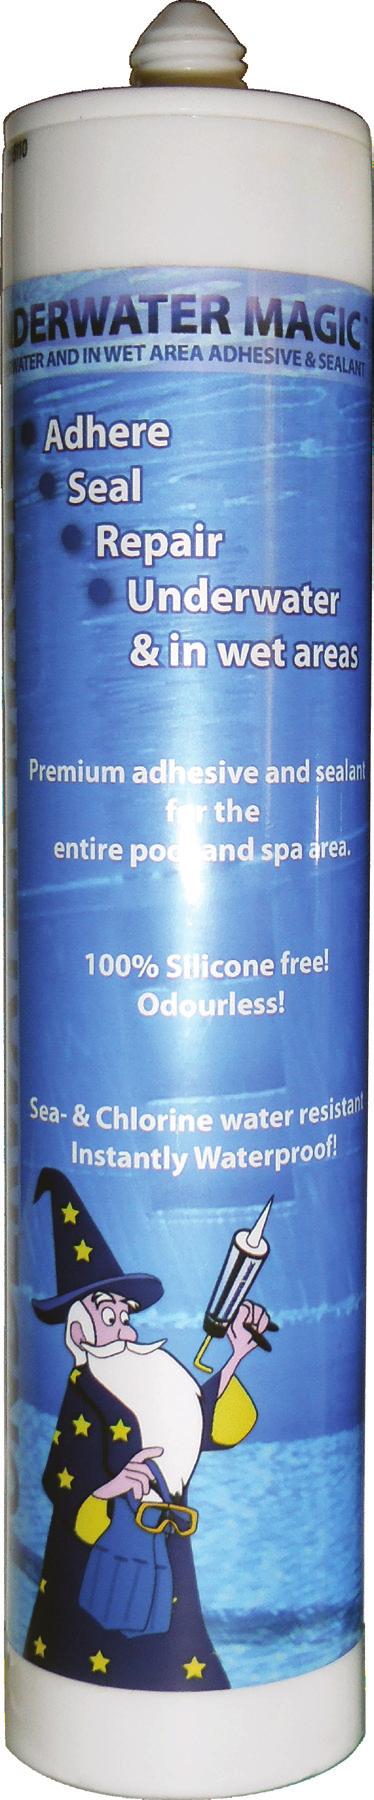 TM adhesive & sealant is a one component, elastic remaining extremely powerful sealant and adhesive based on MS polymer.